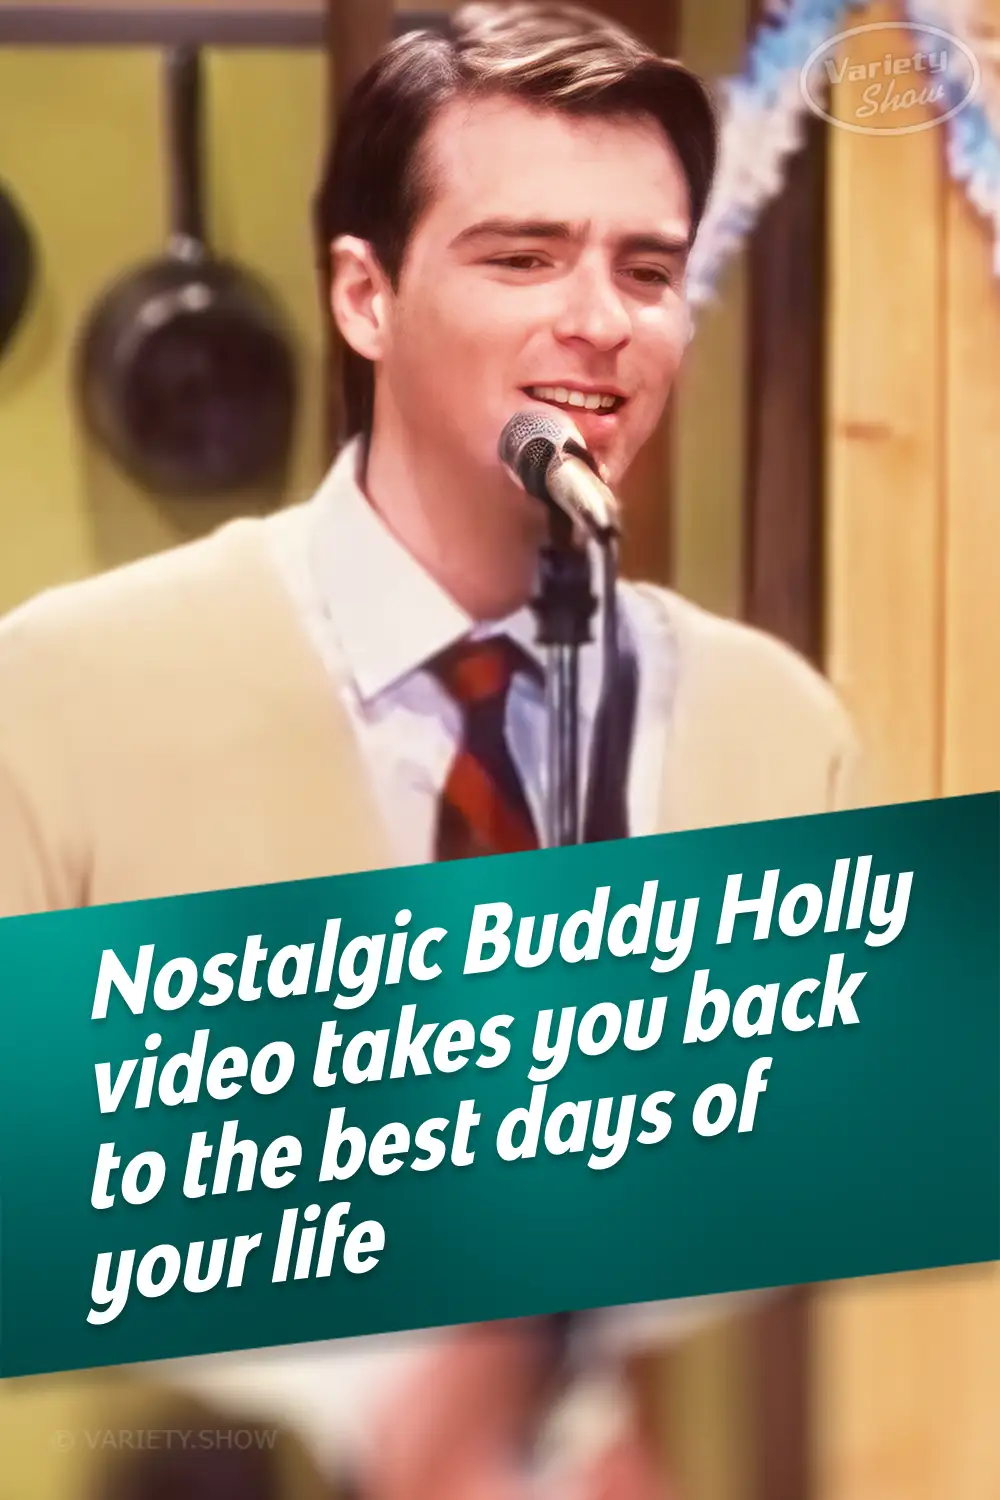 Nostalgic Buddy Holly video takes you back to the best days of your life